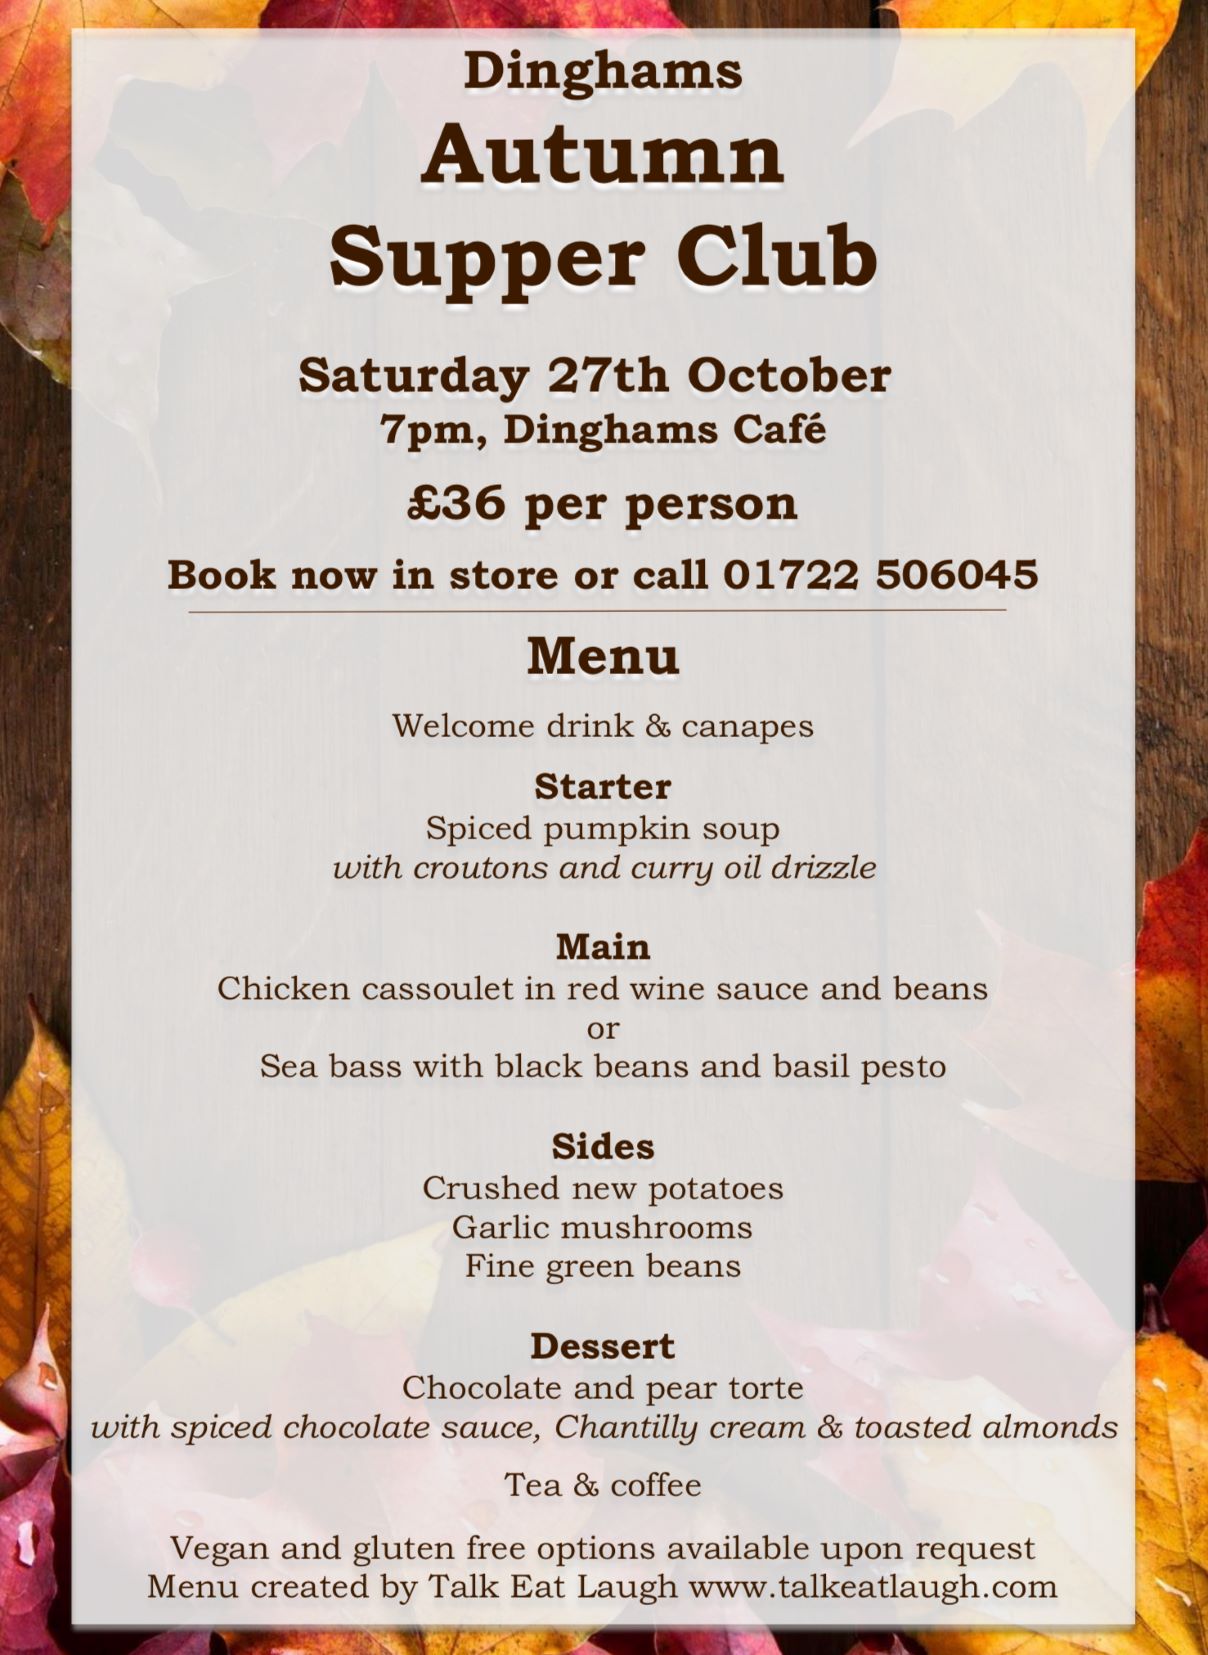 Supper Club with Dinghams, 27th October